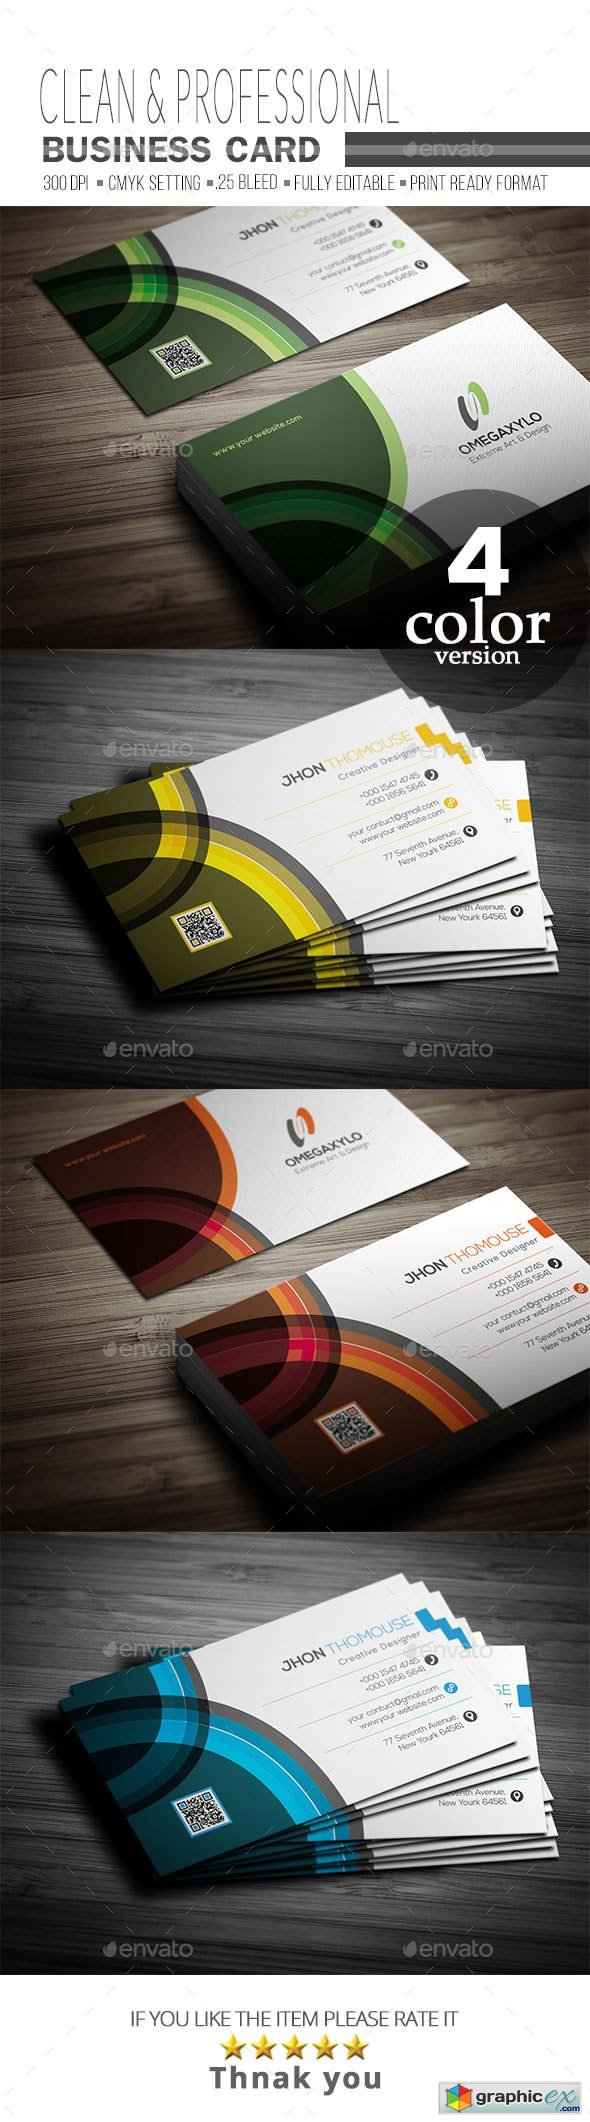 Business Card 20294076